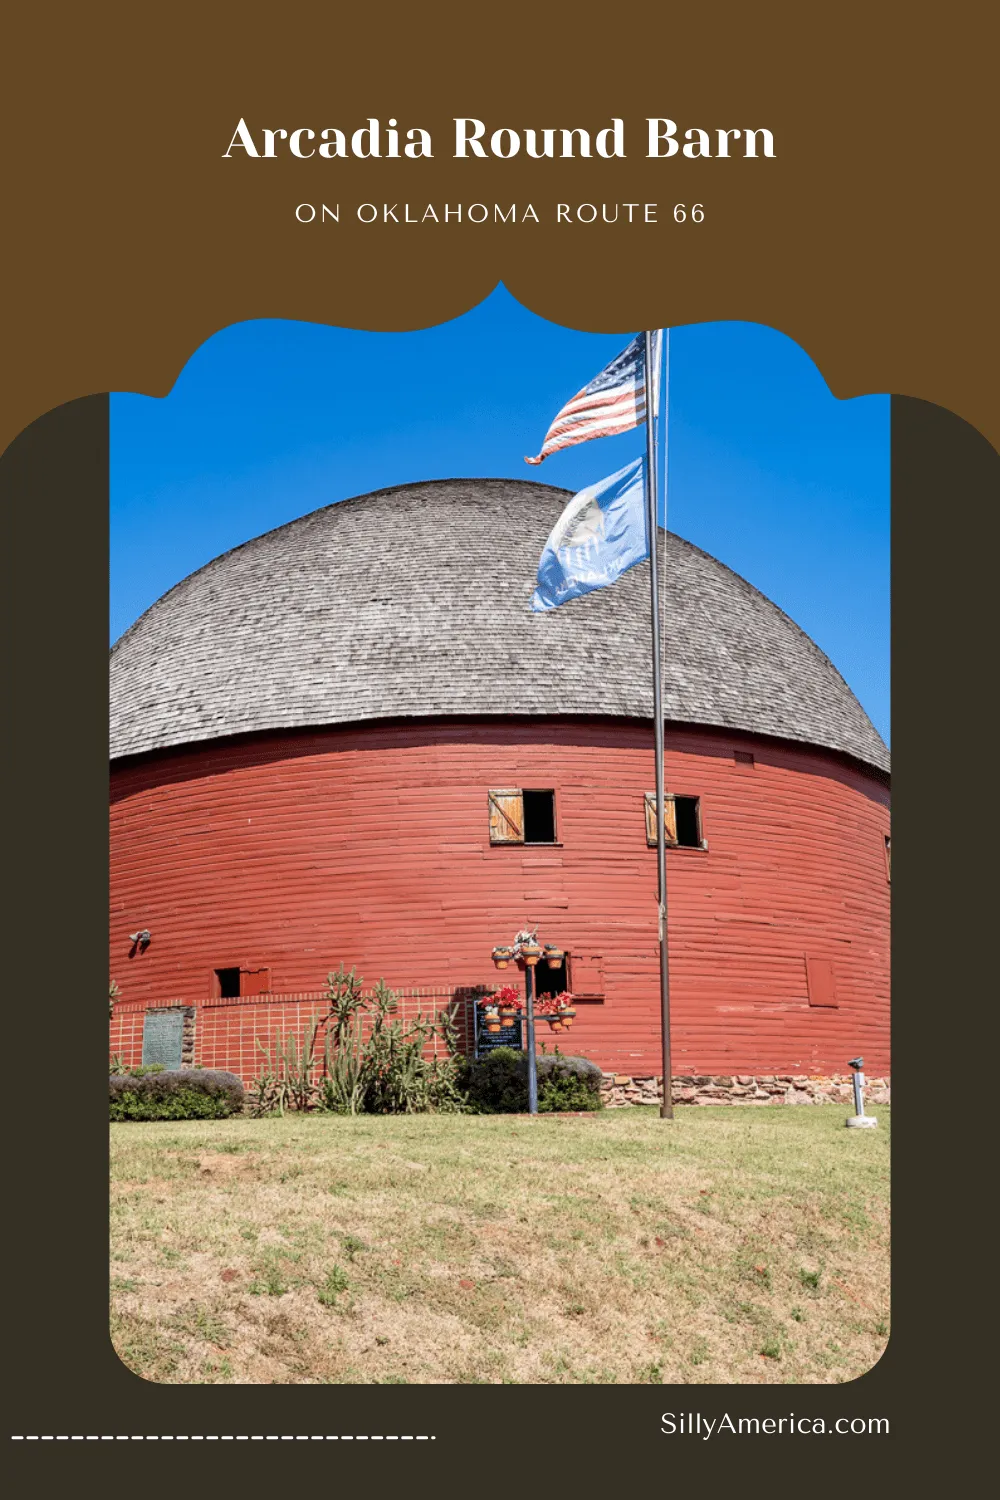 Traveling Route 66? One of the most iconic Route 66 stops is an unlikely attraction that comes in an unlikely shape: Arcadia Round Barn in Oklahoma. Add this roadside attraction to your travel itinerary to visit on a Route 66 road trip through Oklahoma.  #RoadTrips #RoadTripStop #Route66 #Route66RoadTrip #OklahomaRoute66 #Oklahoma #OklahomaRoadTrip #OklahomaRoadsideAttractions #RoadsideAttractions #RoadsideAttraction #RoadsideAmerica #RoadTrip